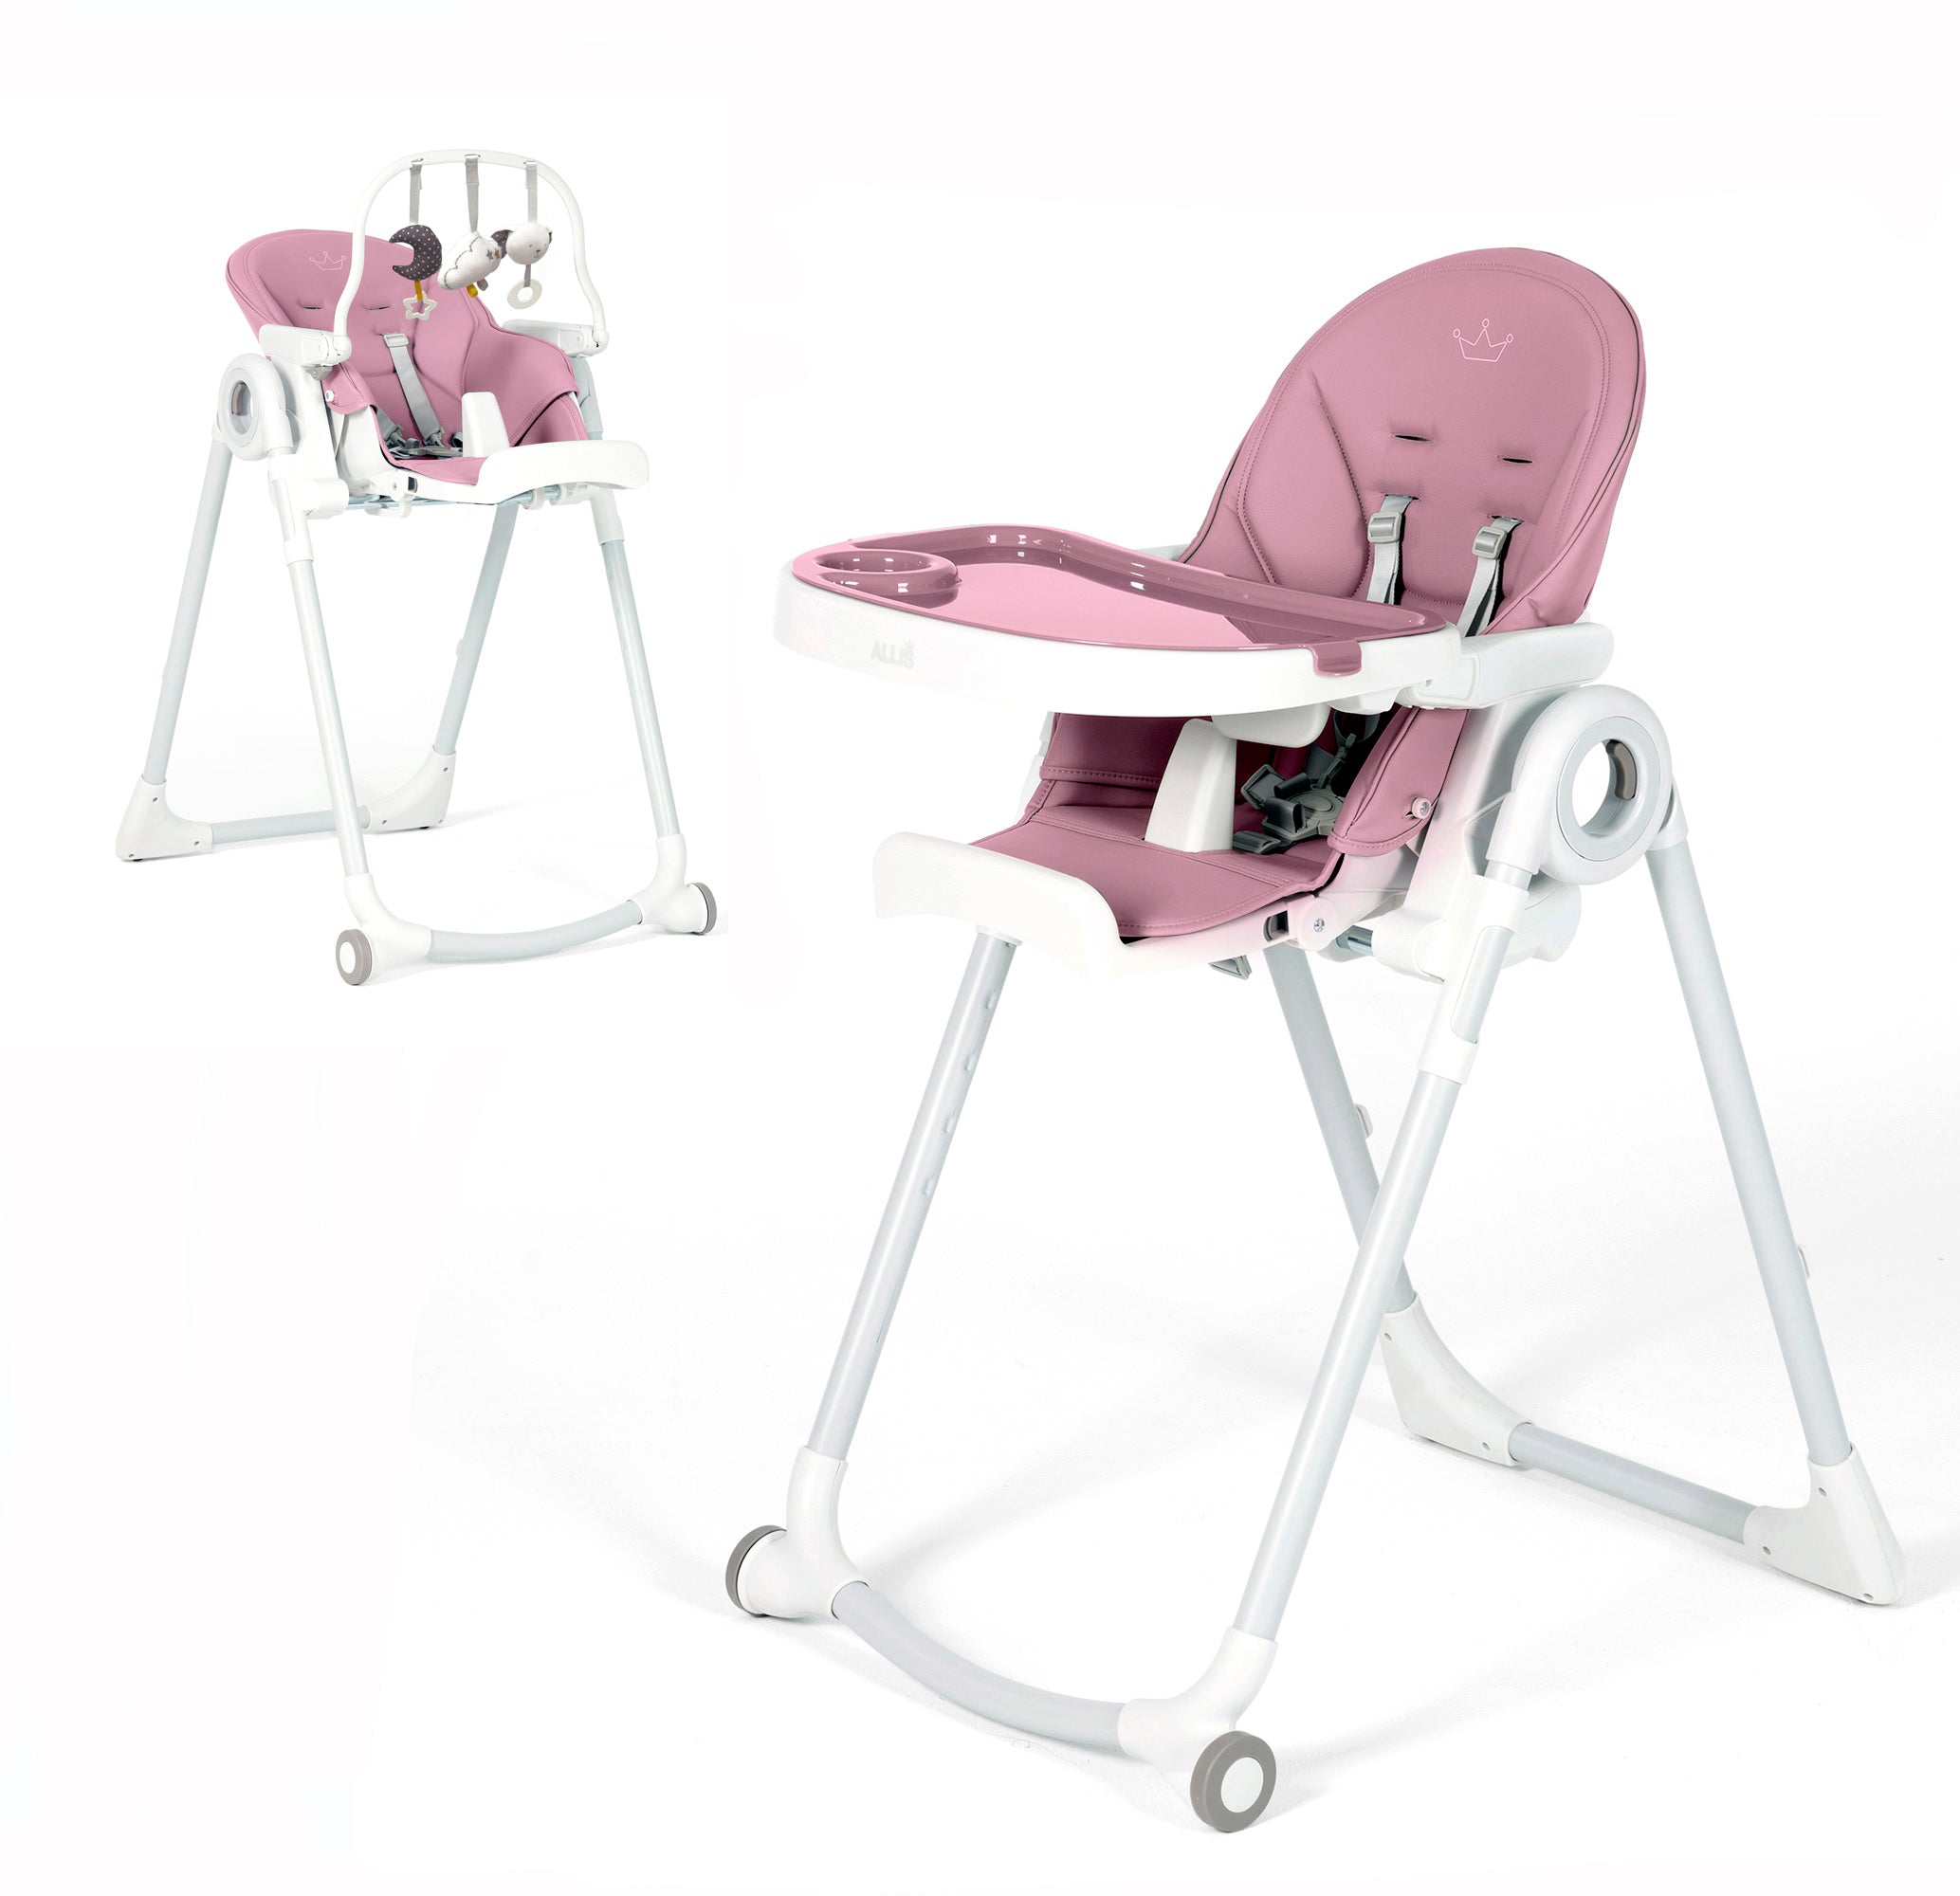 Lola High Chair with Toy Bar and Toys